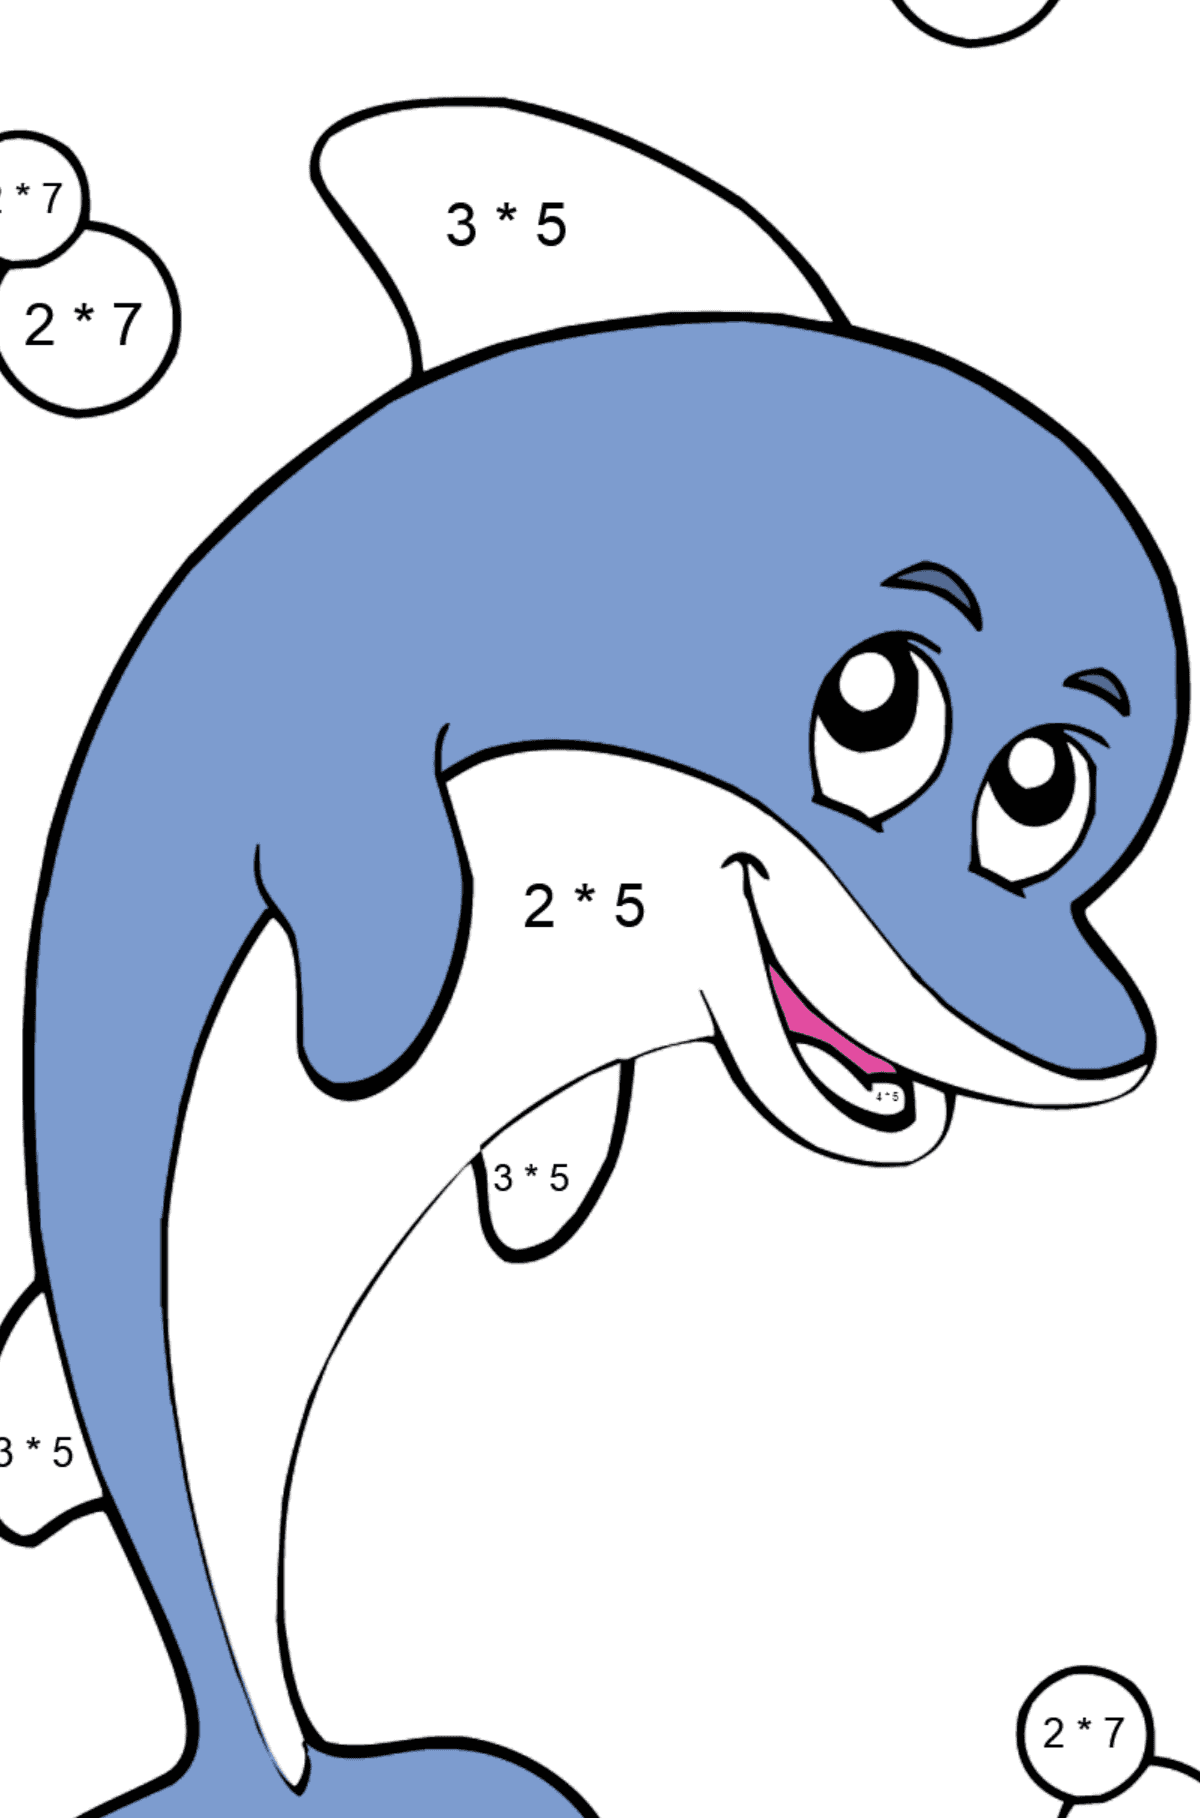 Coloring page with a Cartoon dolphin - Math Coloring - Multiplication for Kids